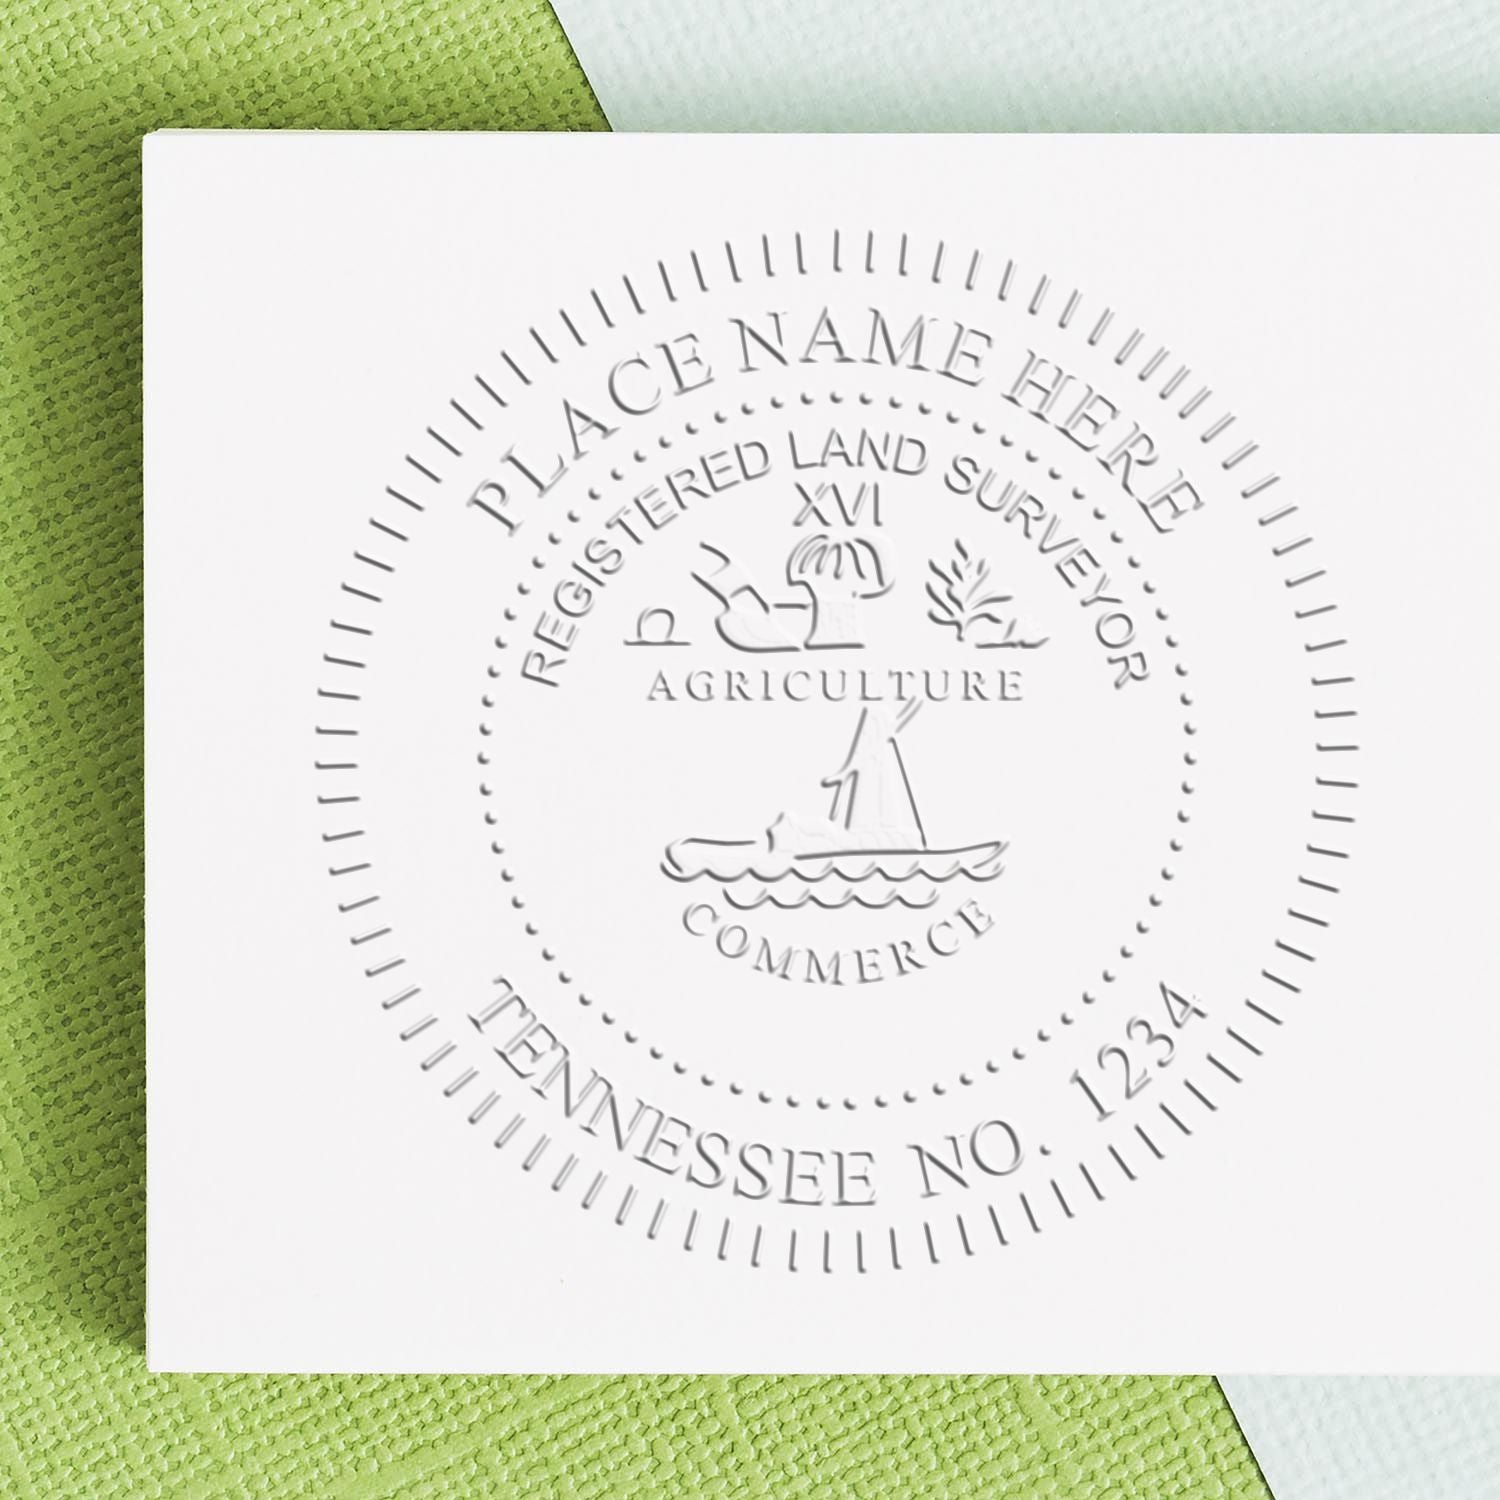 A photograph of the Tennessee Desk Surveyor Seal Embosser stamp impression reveals a vivid, professional image of the on paper.